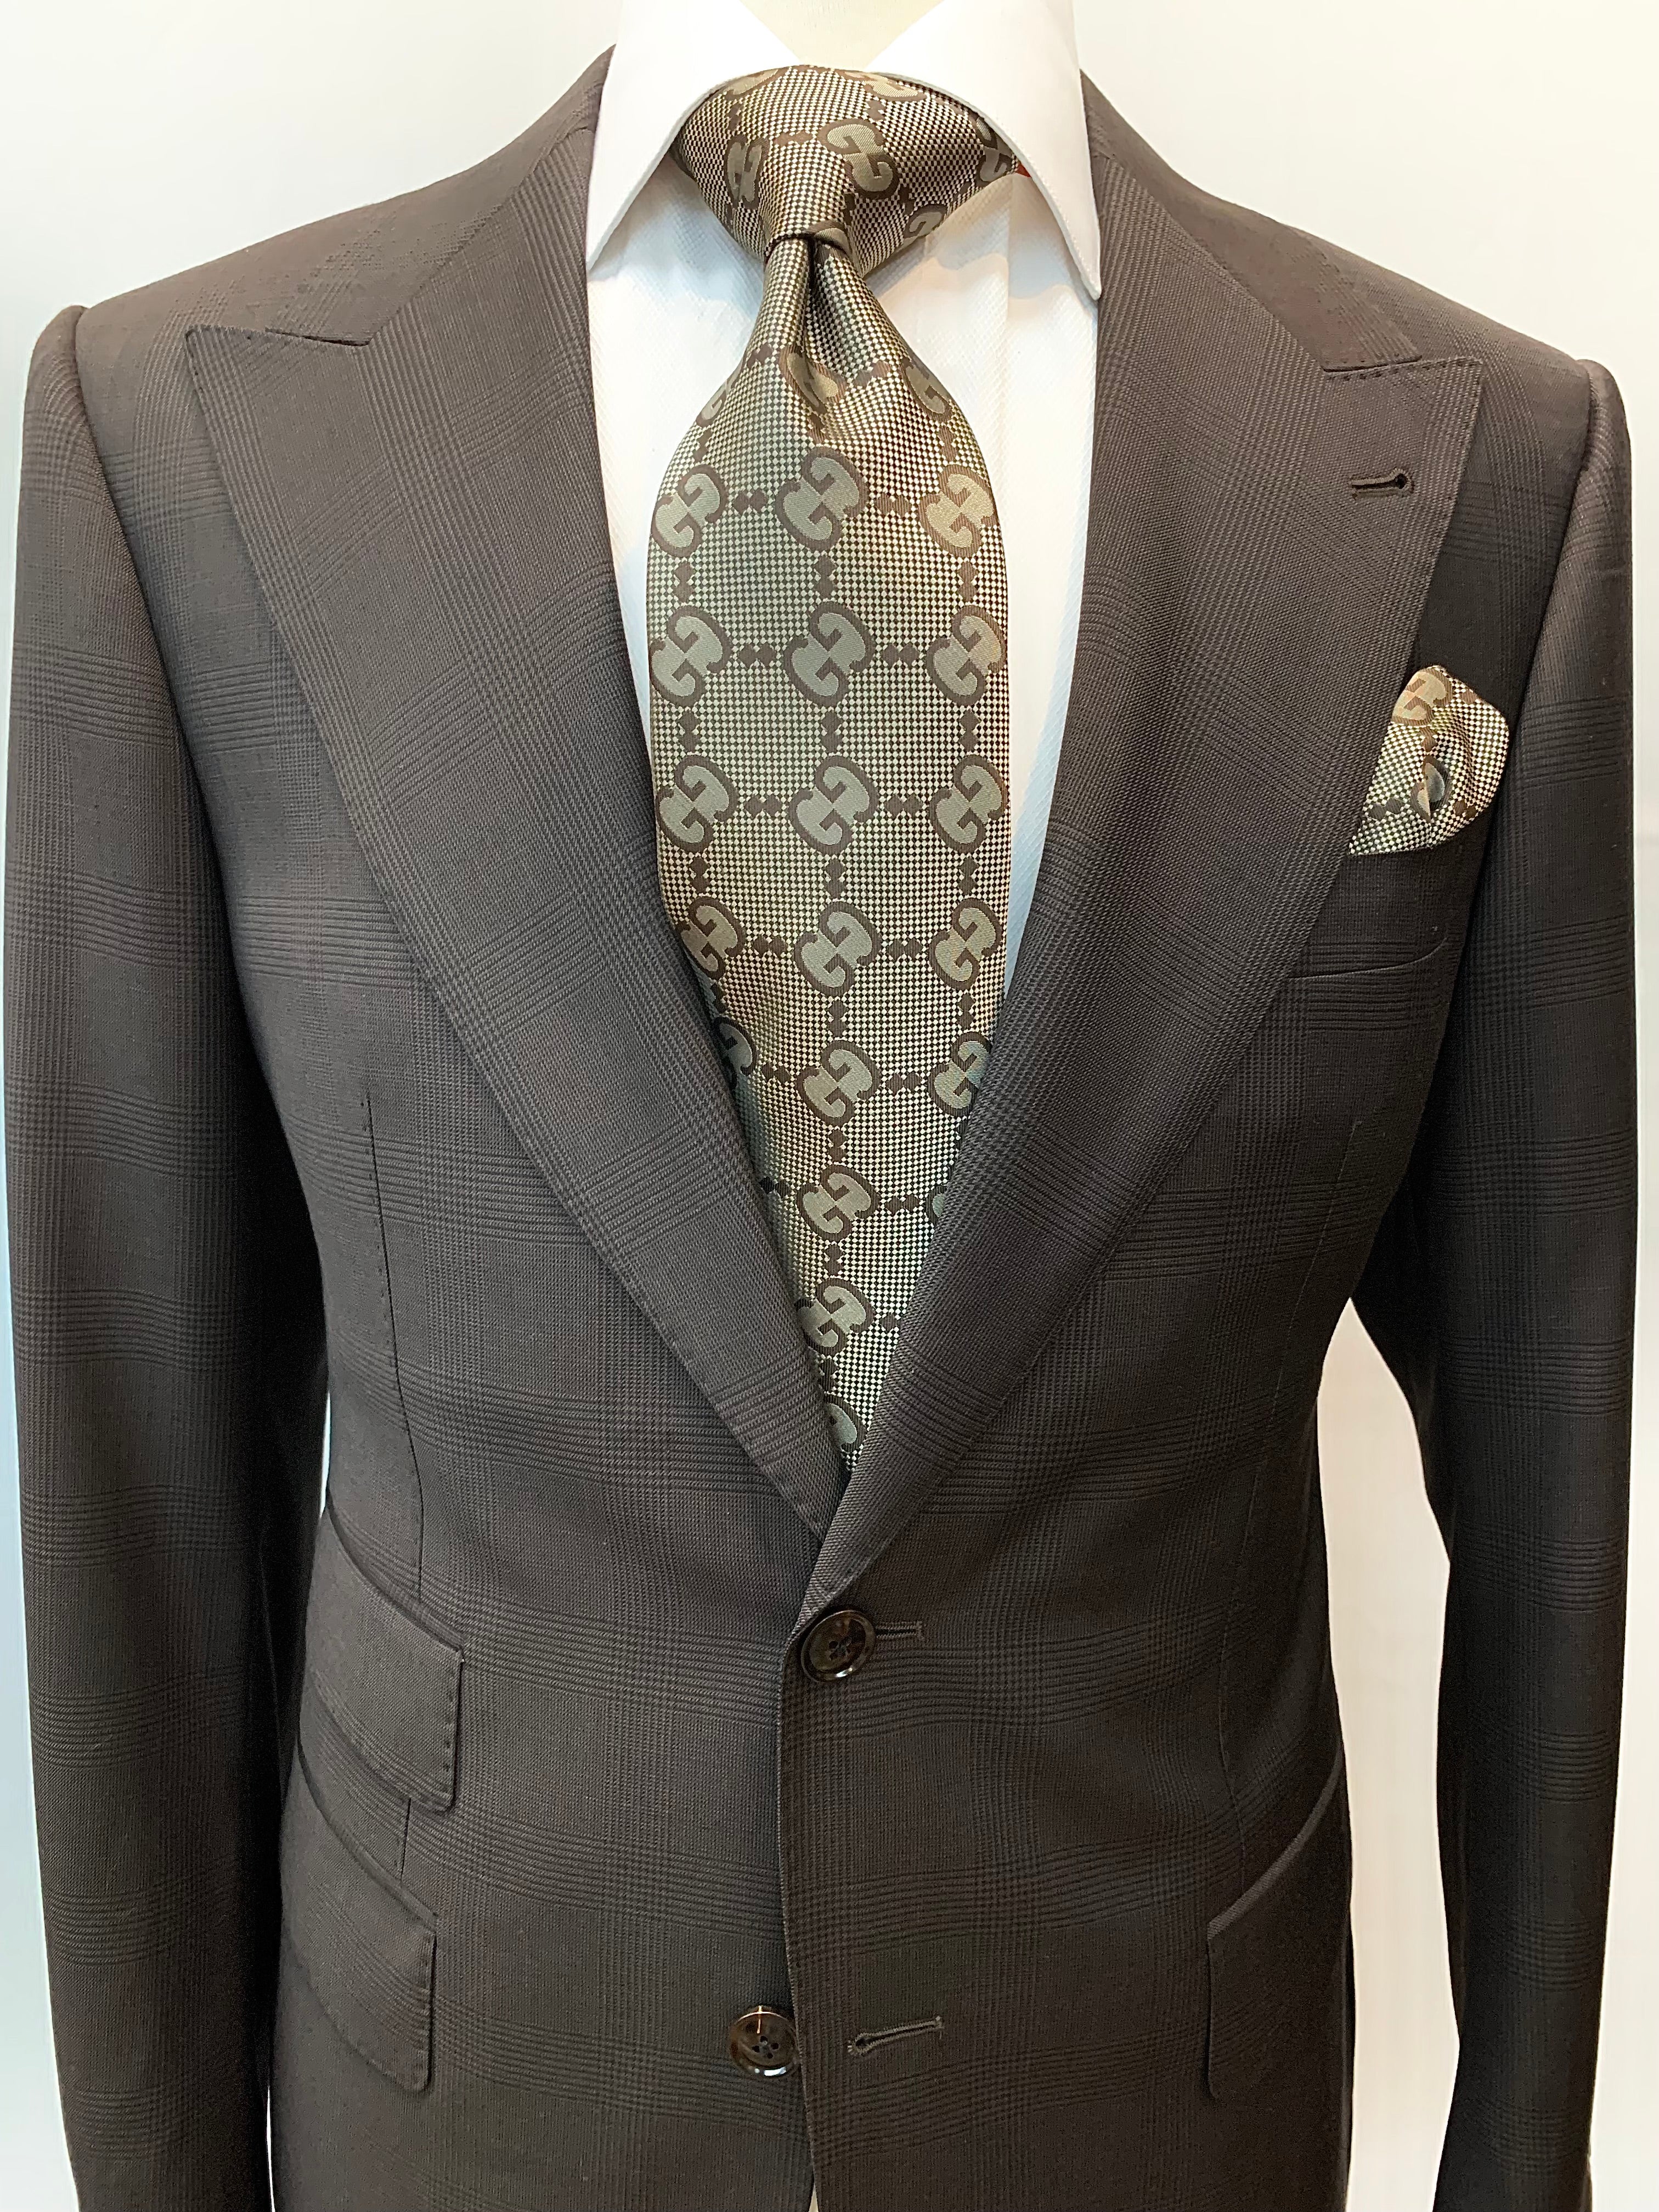 Stitch by Stitch Brown Prince of Wailes Suit